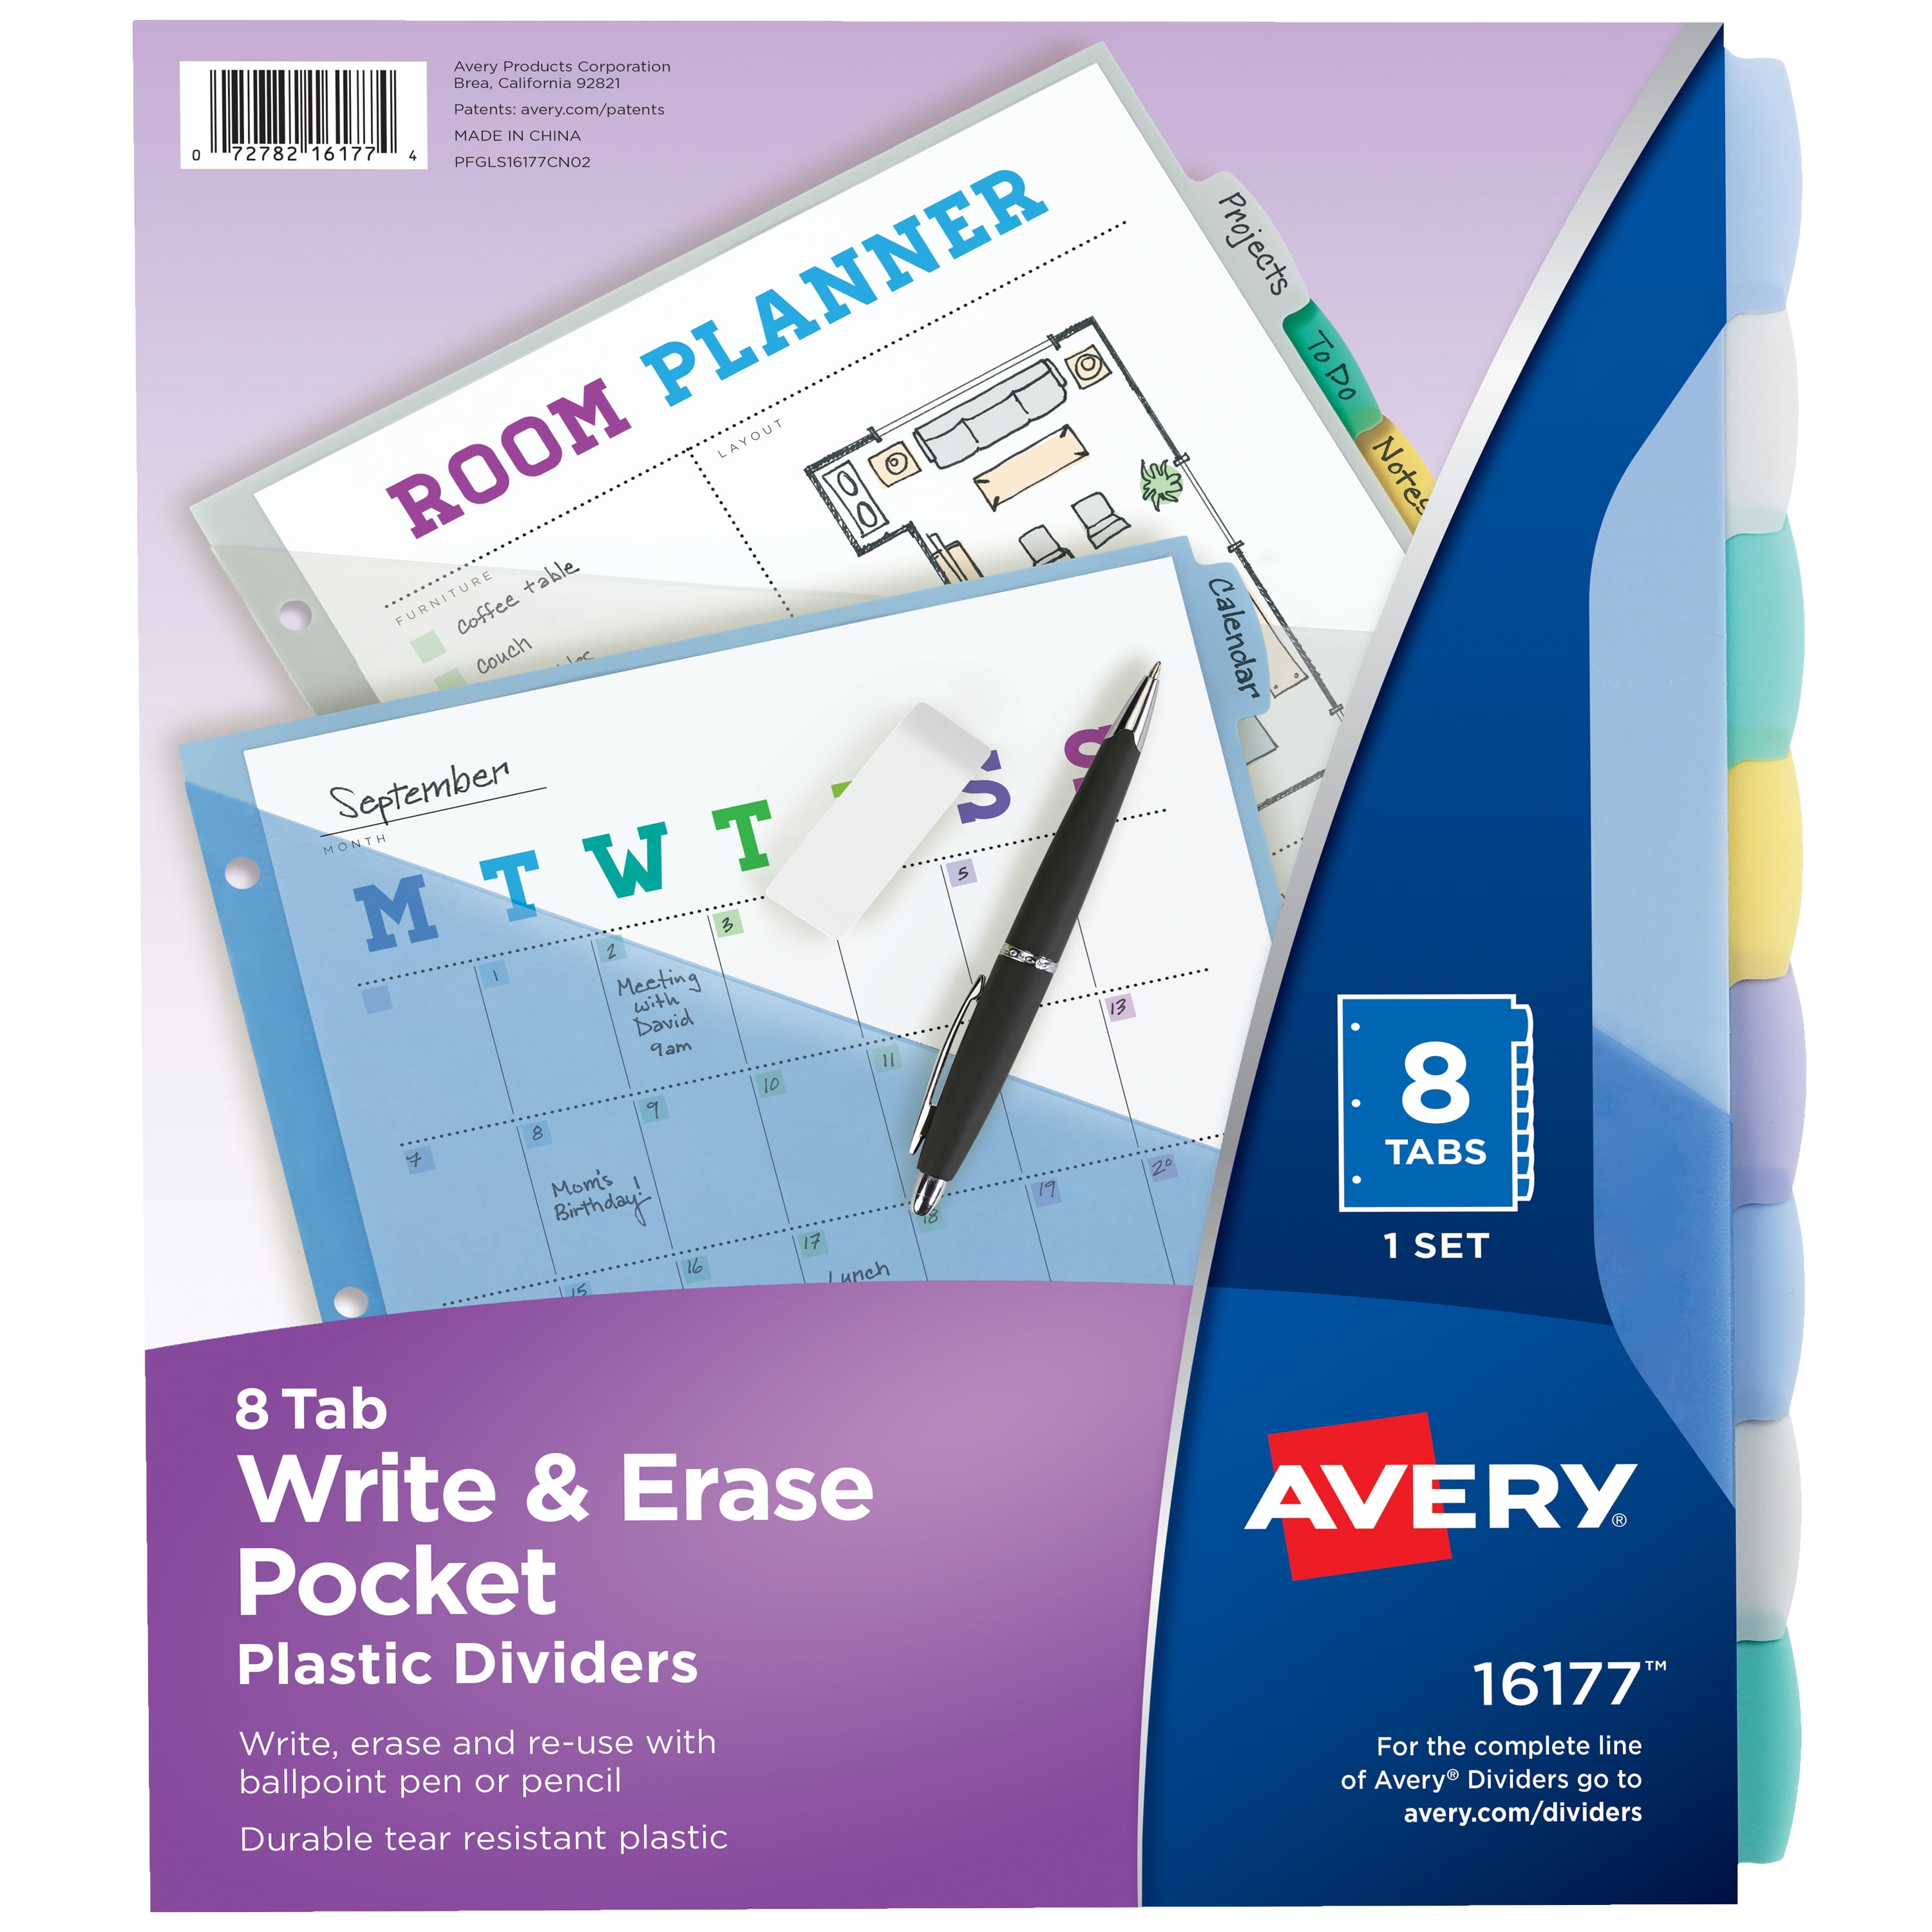 BRAND NEW PACKAGE OF 5 Avery Studio Collection Write-On Plastic Dividers 